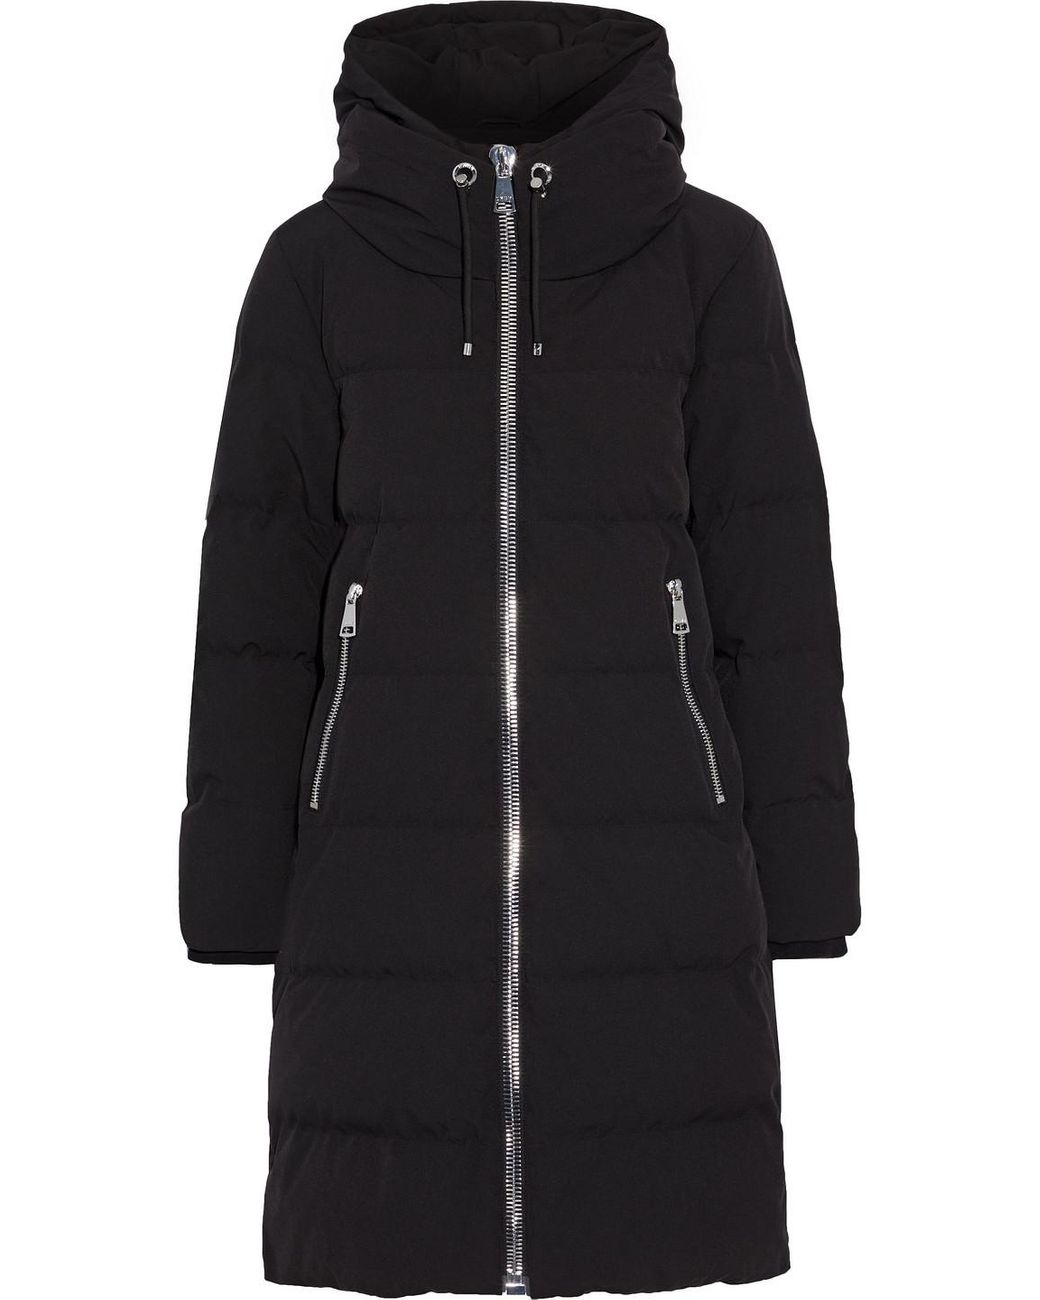 DKNY Synthetic Hooded Down Jacket in Black - Save 67% - Lyst